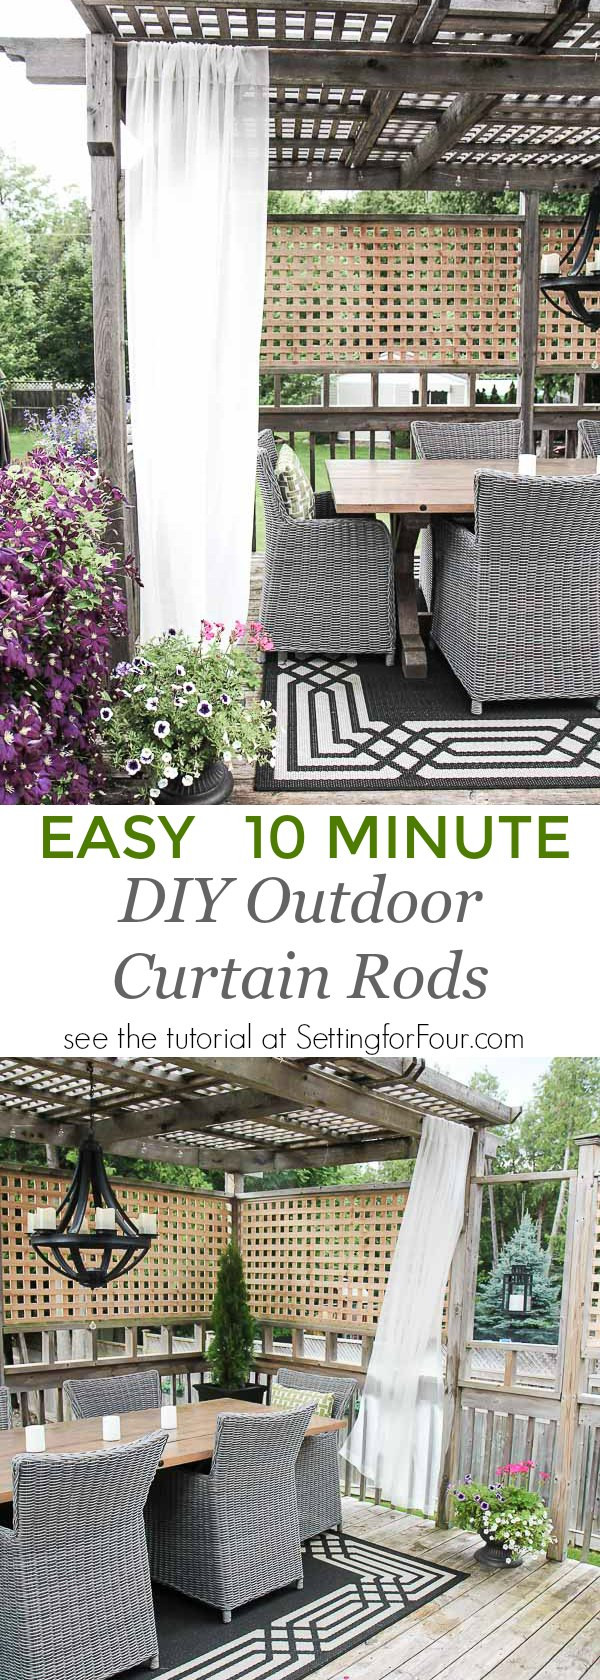 DIY Outdoor Curtain Rod
 Easy DIY Outdoor Curtain Rods In 10 Minutes Setting for Four